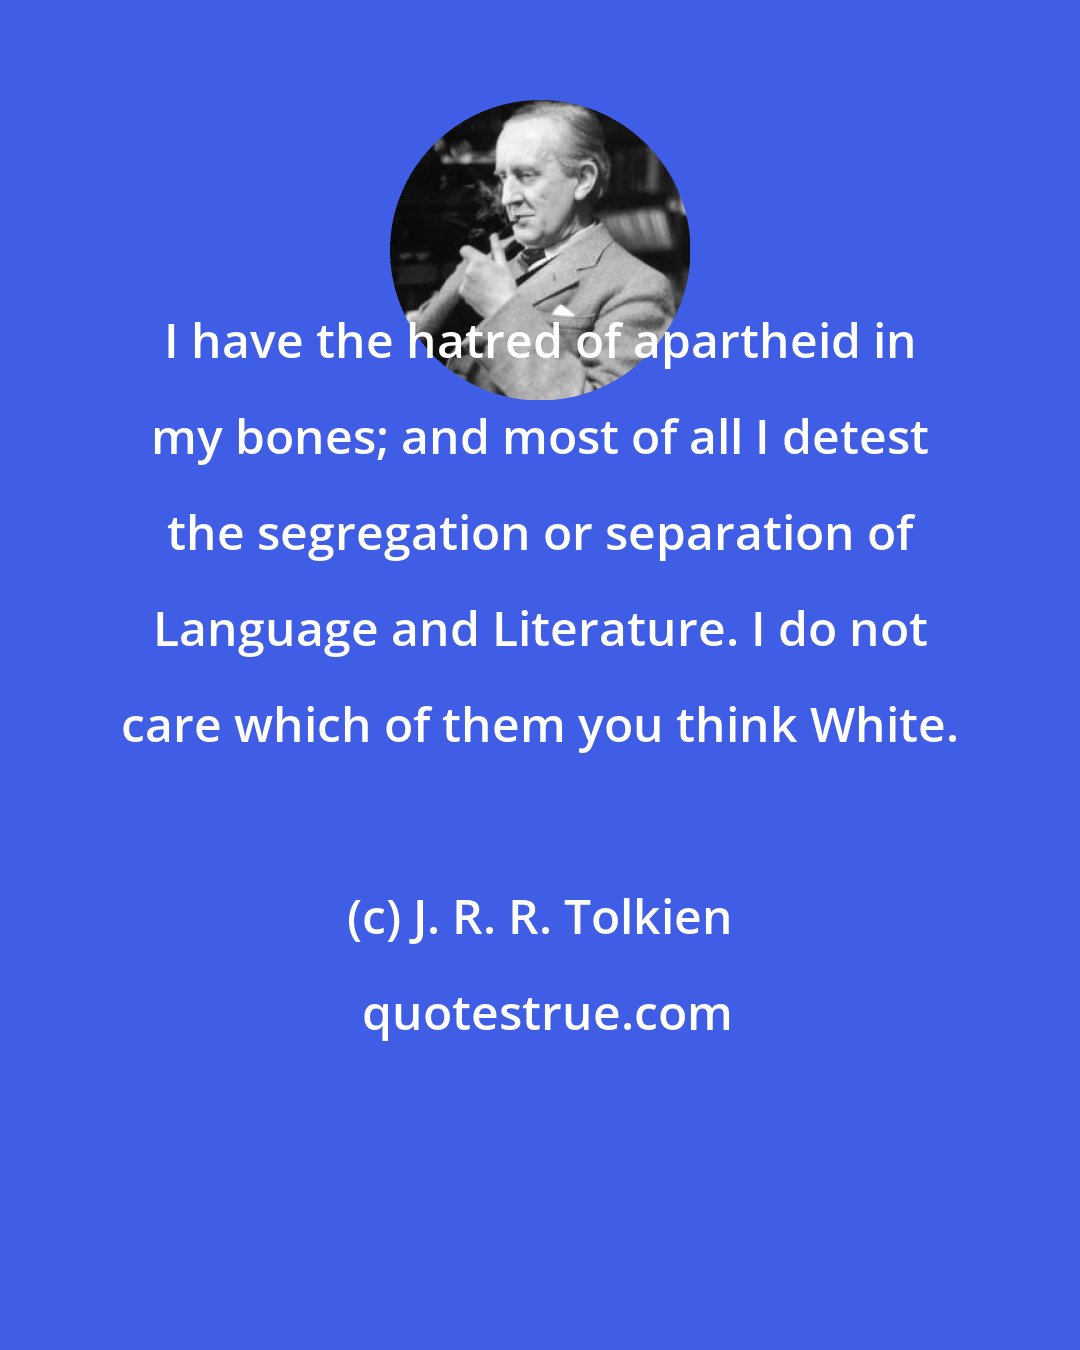 J. R. R. Tolkien: I have the hatred of apartheid in my bones; and most of all I detest the segregation or separation of Language and Literature. I do not care which of them you think White.